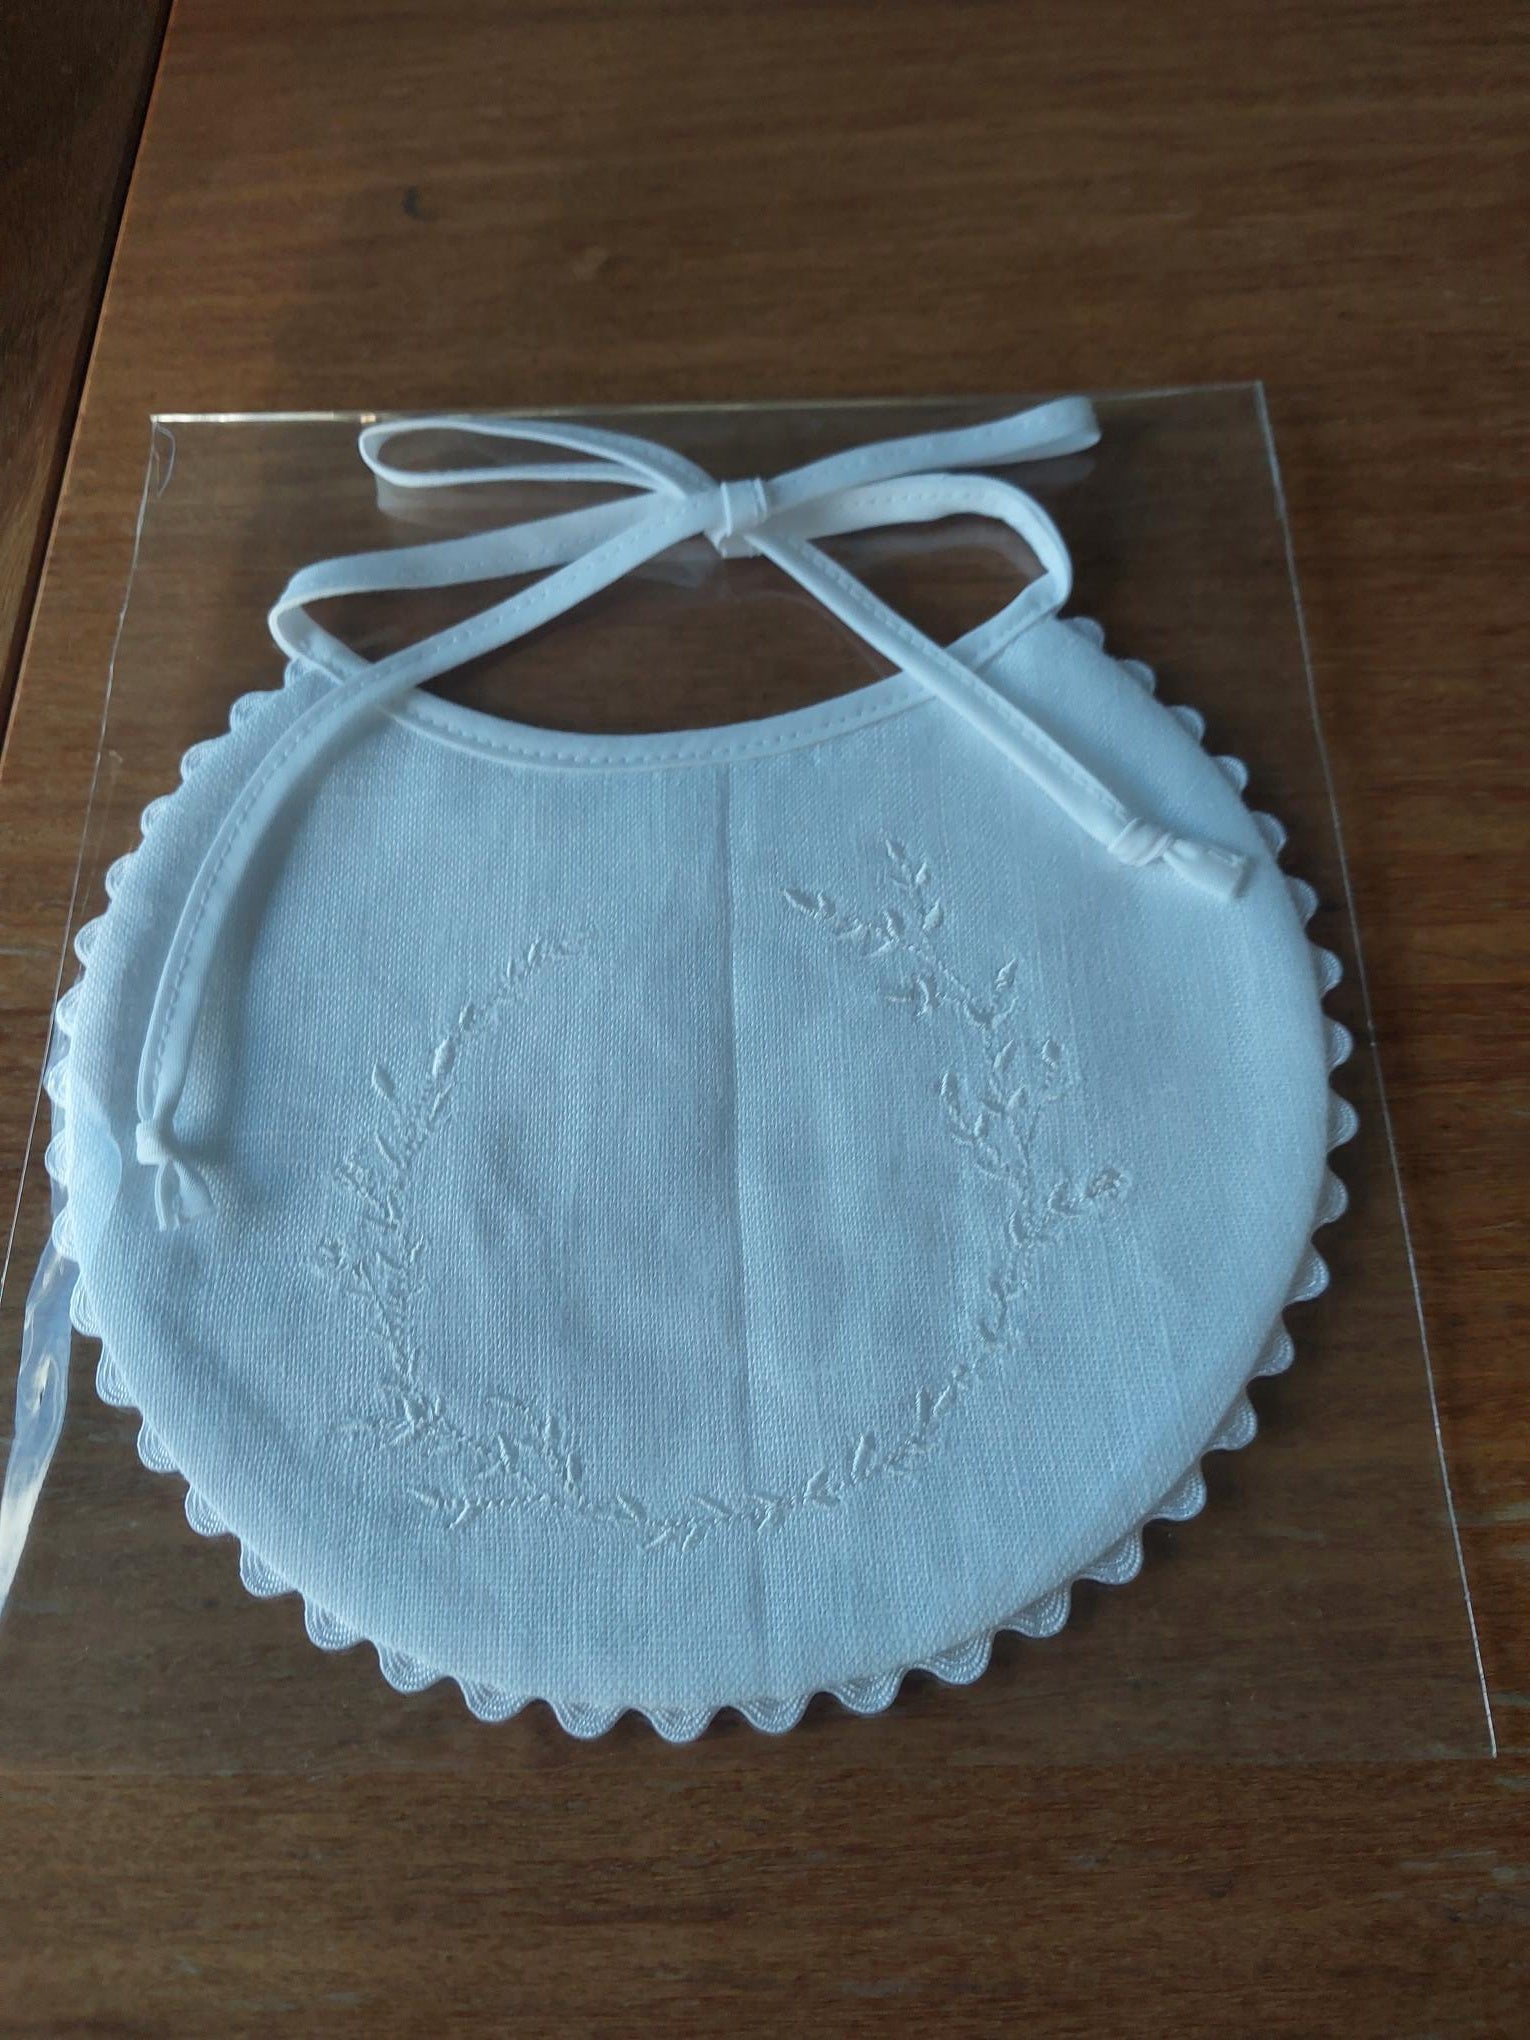 Baby Bib Linen Embroidered White with White Wreath